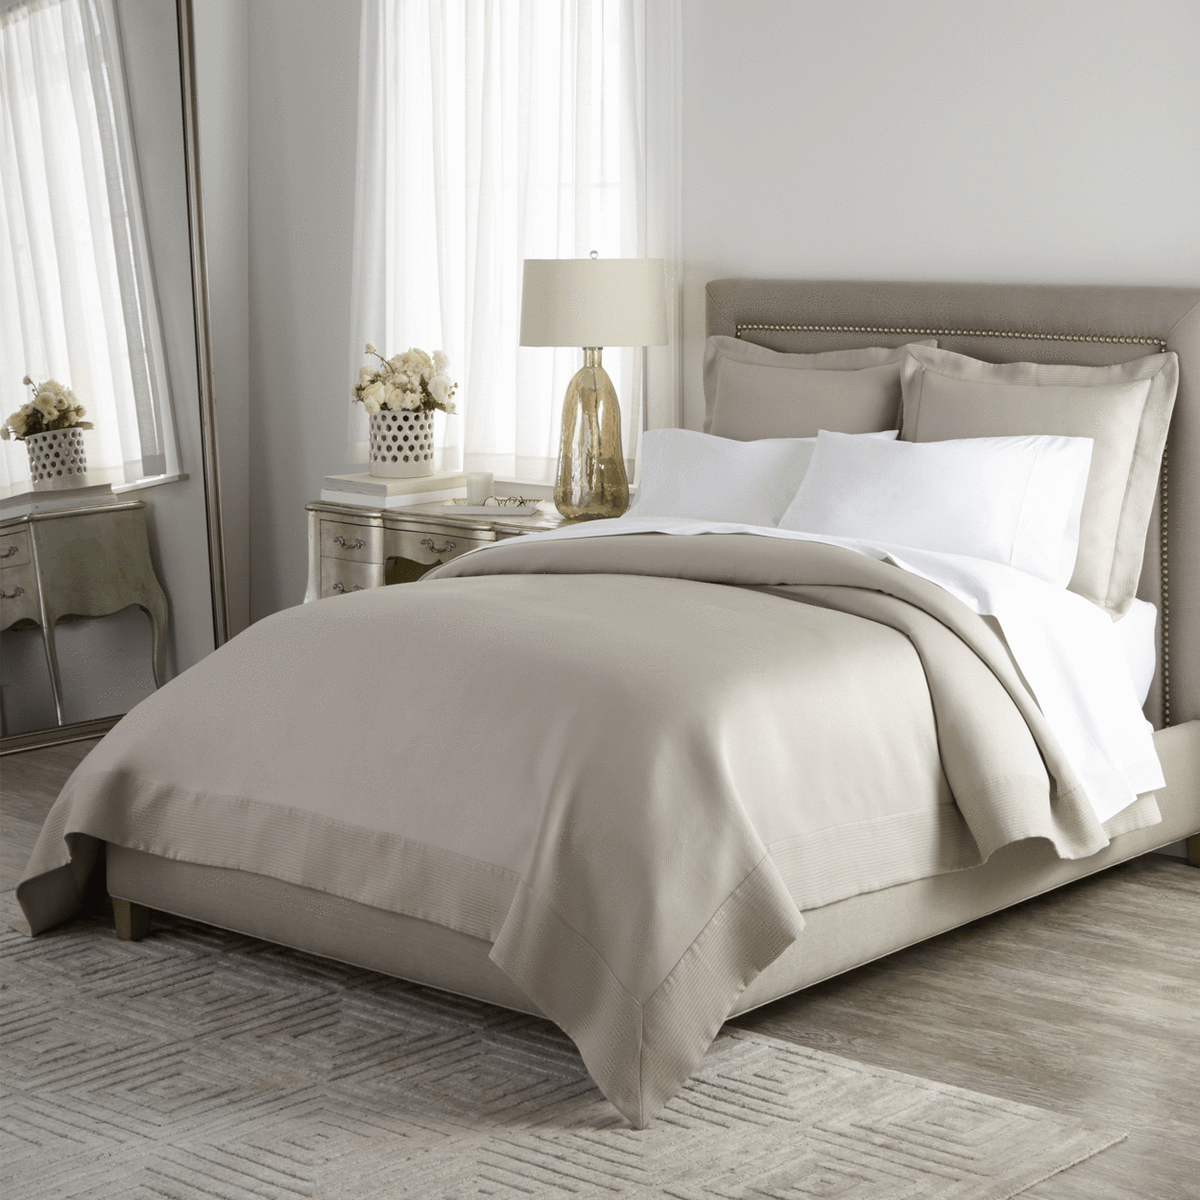 Peacock Alley Angelina Matelasse Bedding Full Bed Lifestyle Pearl Fine Linens